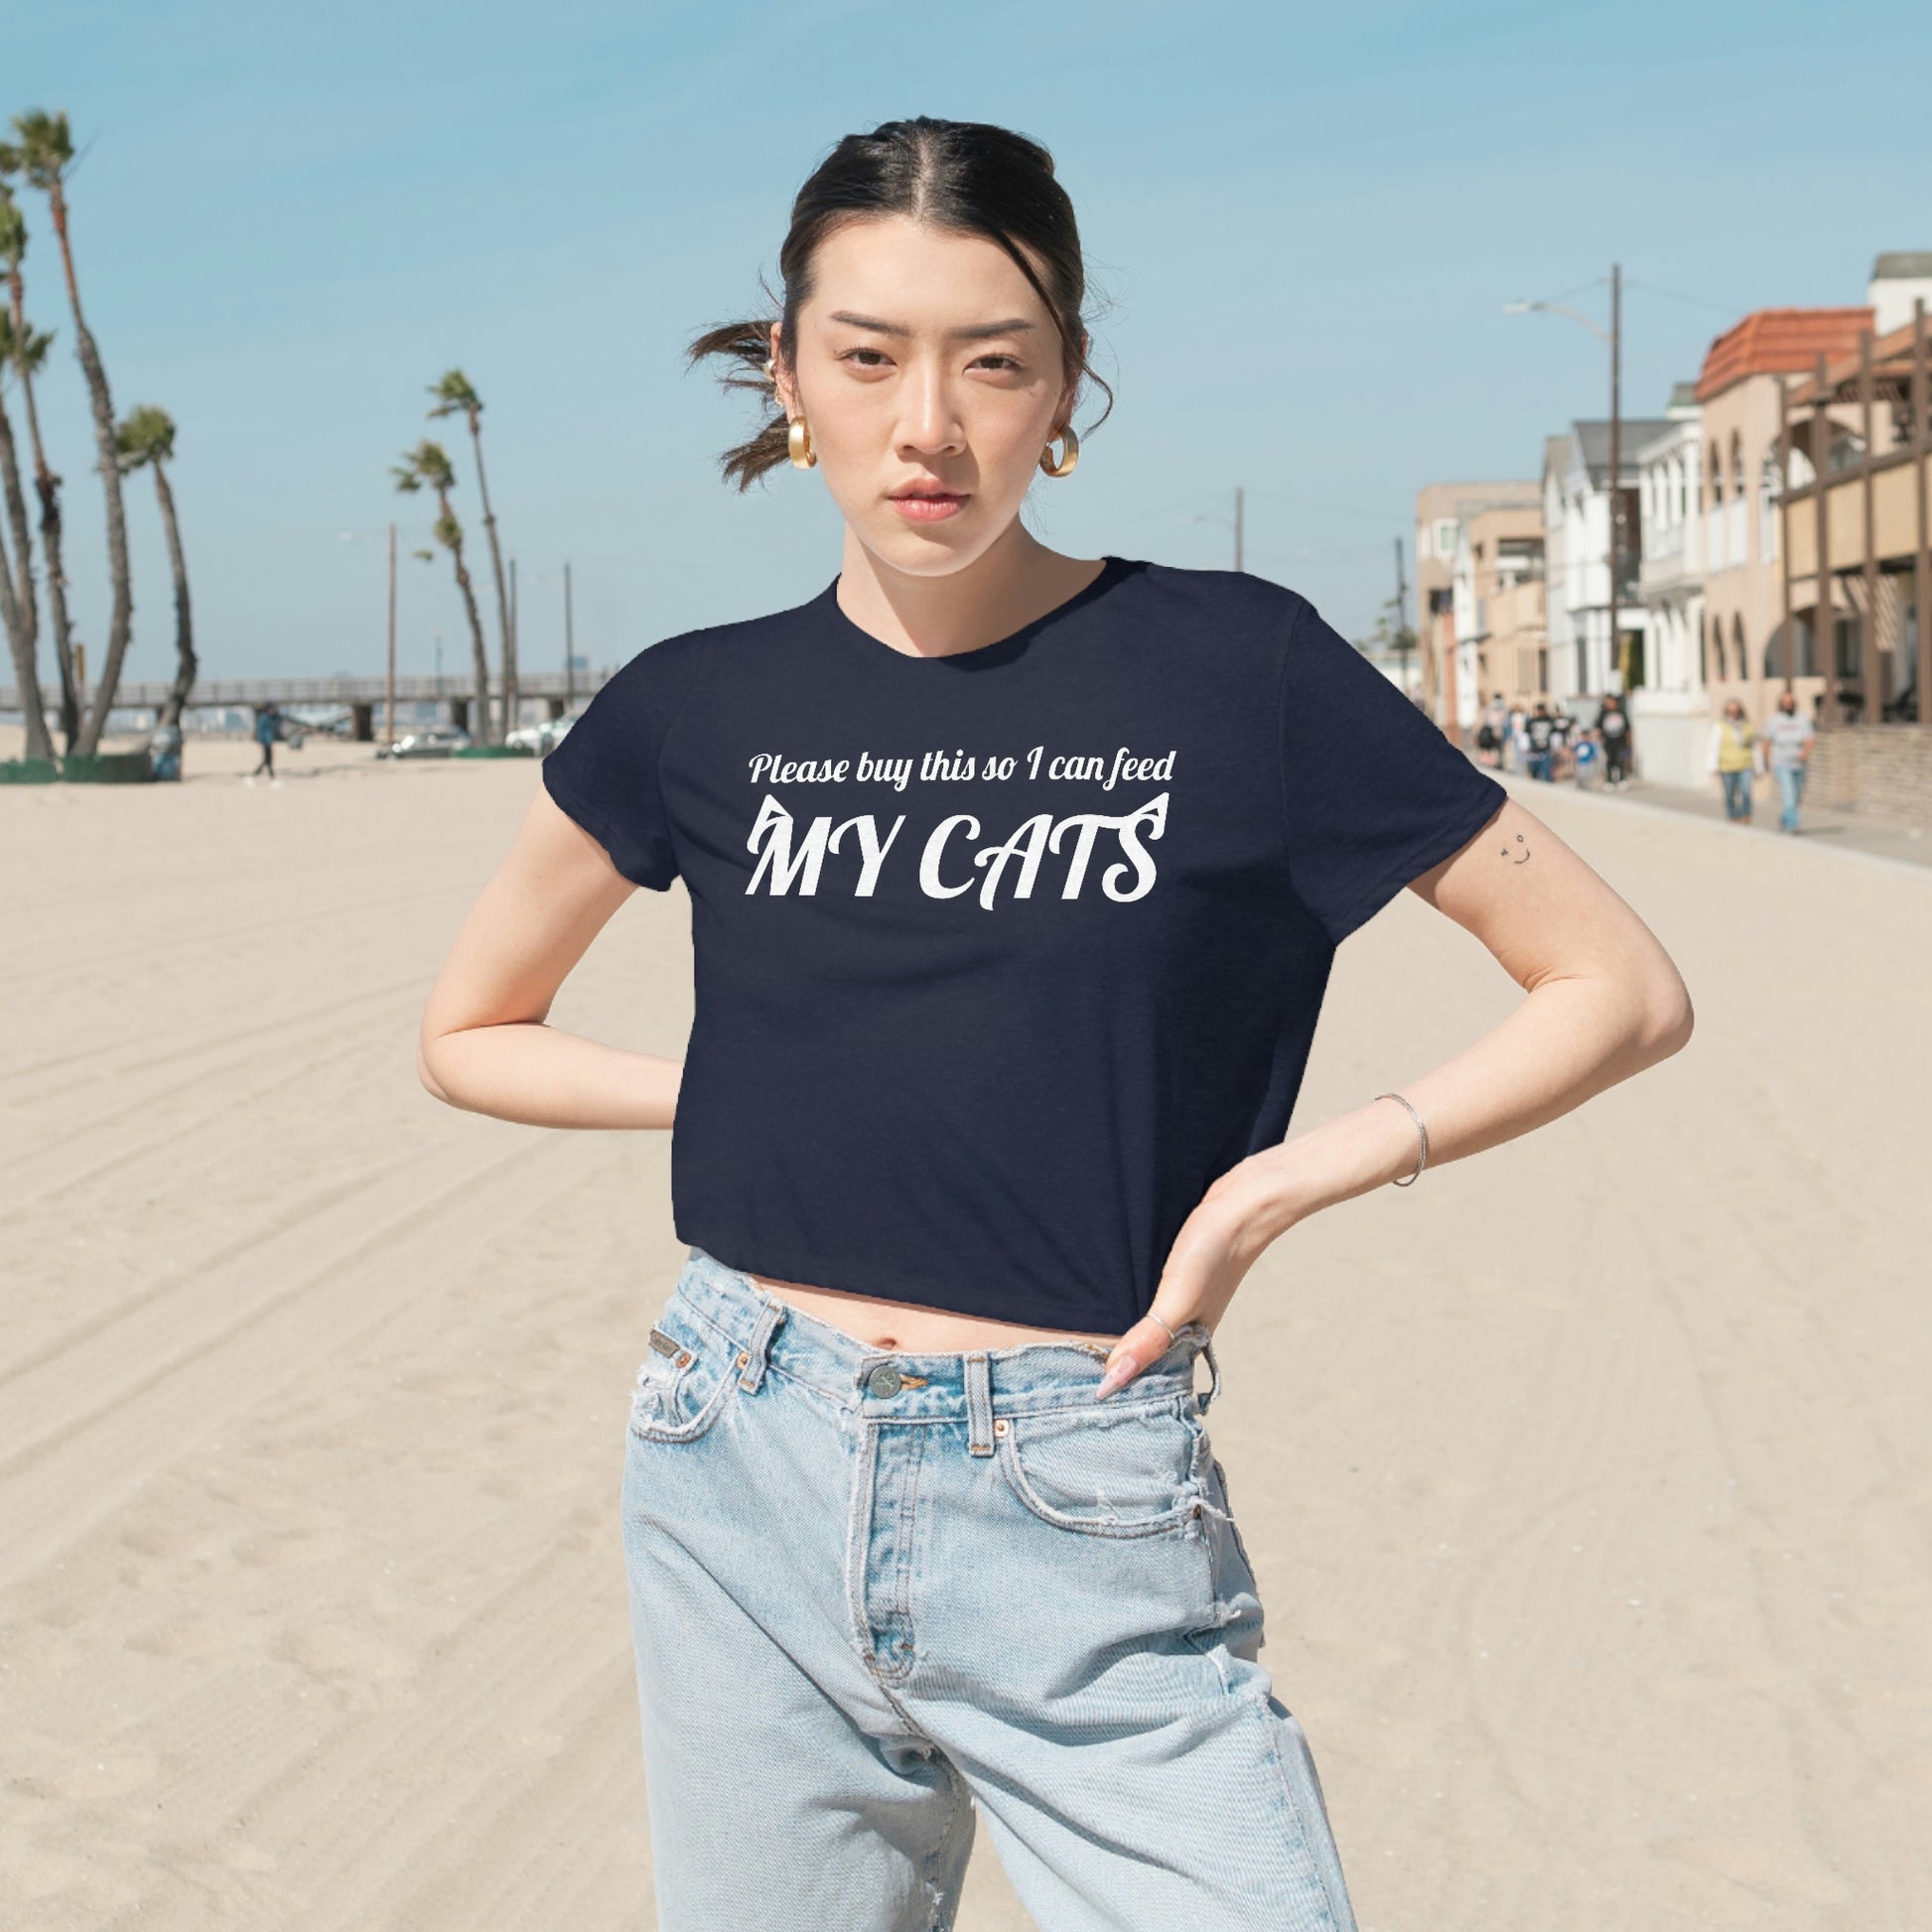 Please buy this so I can feed my cats Women's Flowy Cropped Tee, Funny cat quote cropped top, cute cat cropped top, kawaii cat crop top